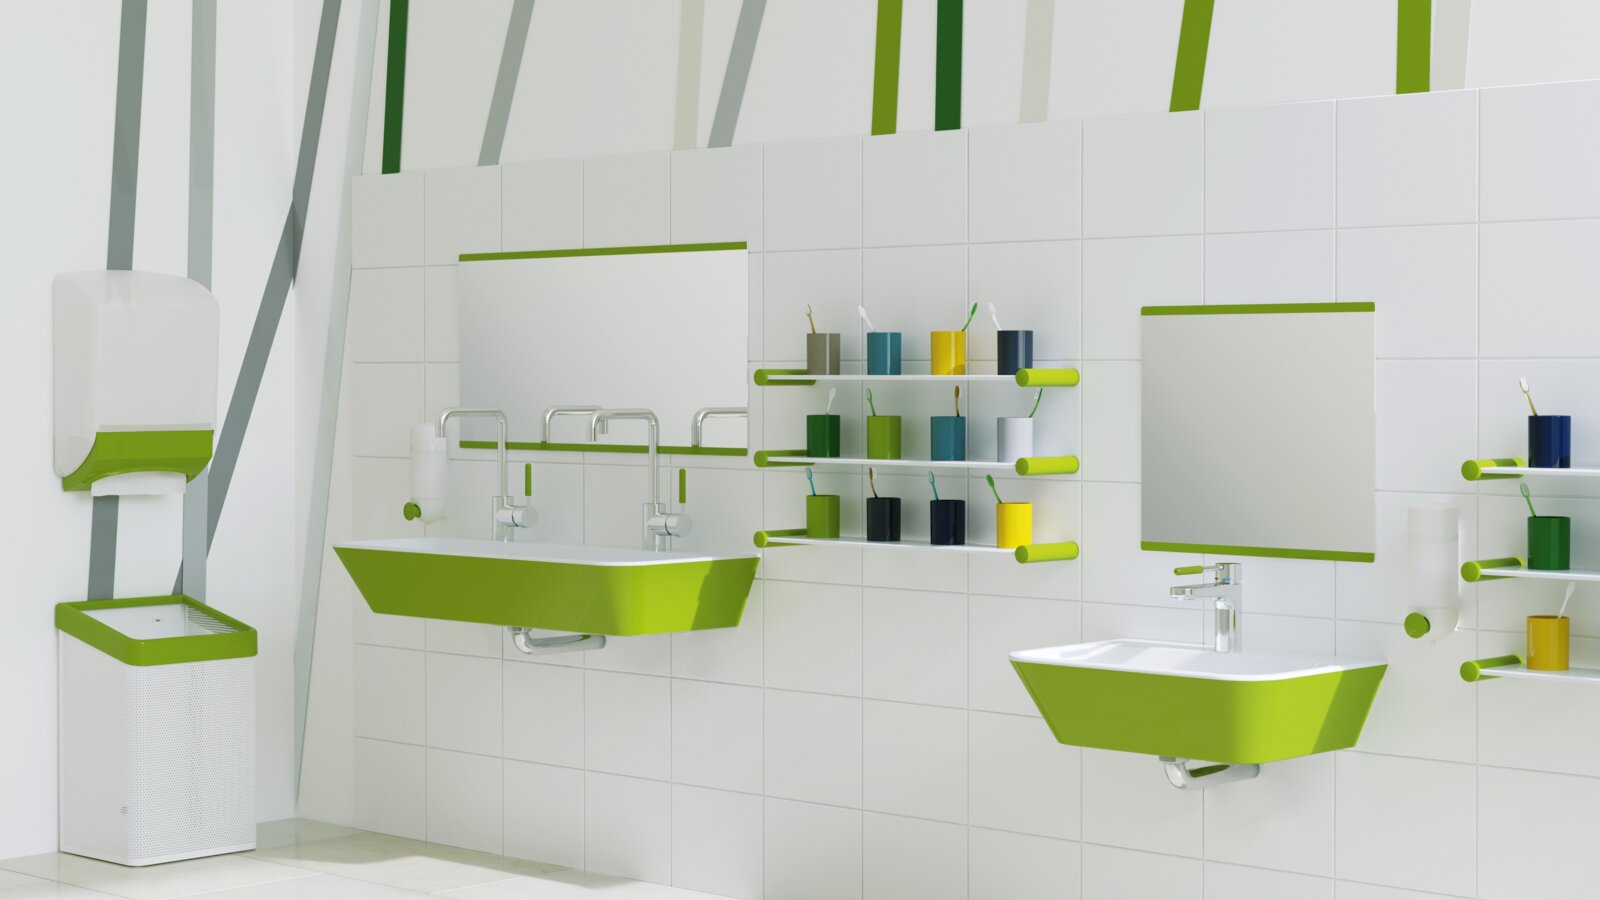 Child-friendly washbasin with green accents; two washbasins at different heights next to colourful toothbrush holders